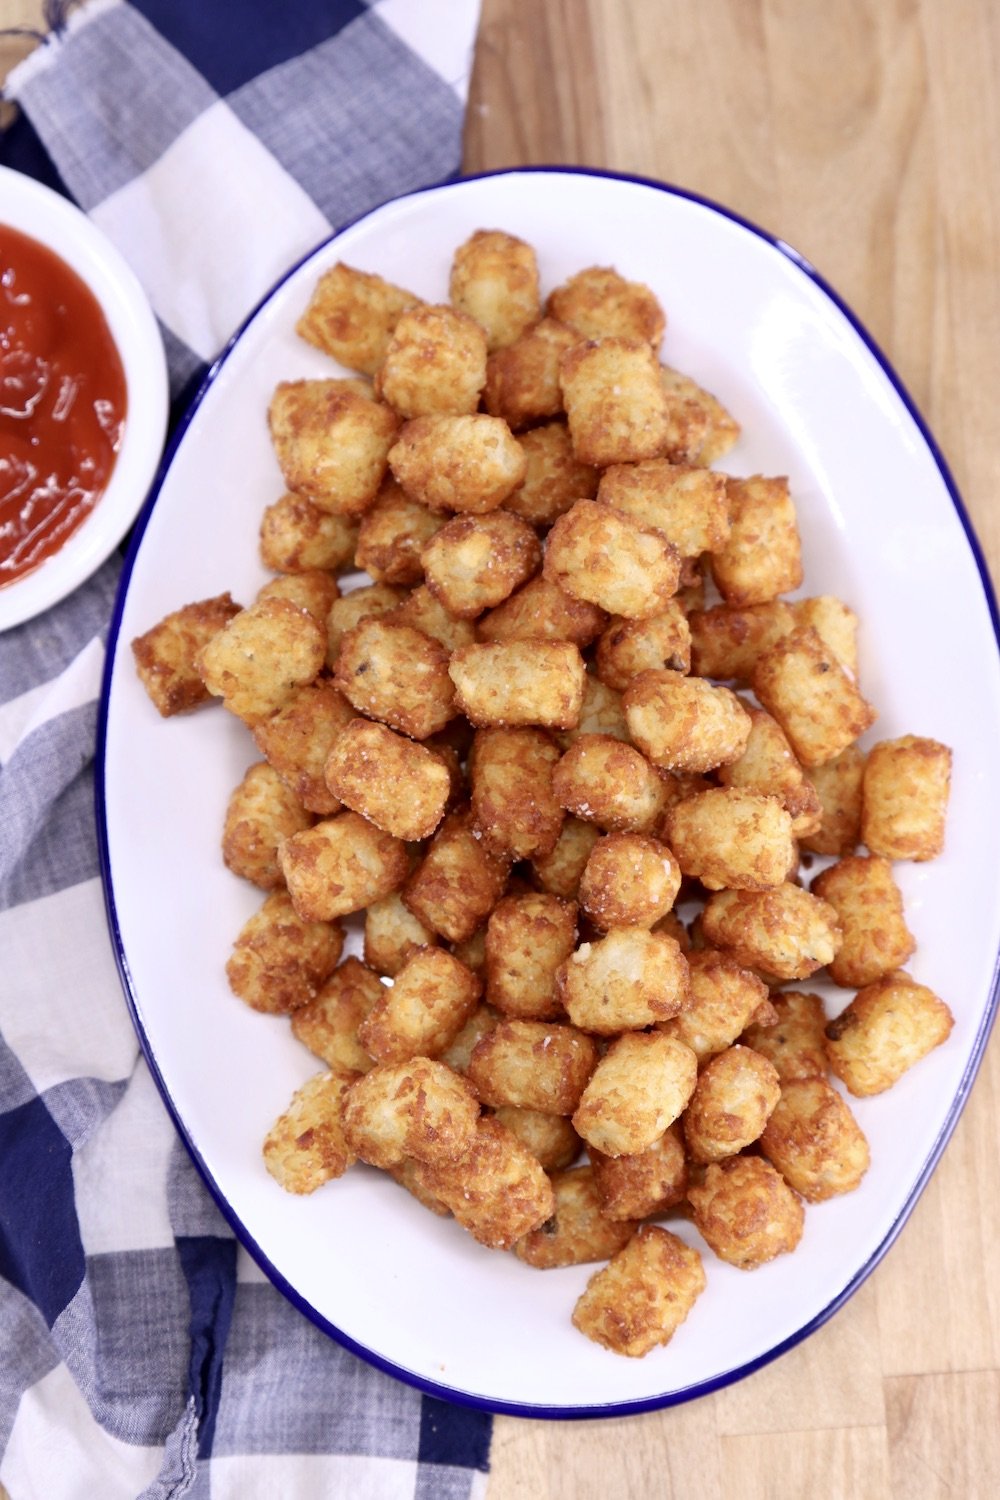 Tater tots on a platter served with ketchup